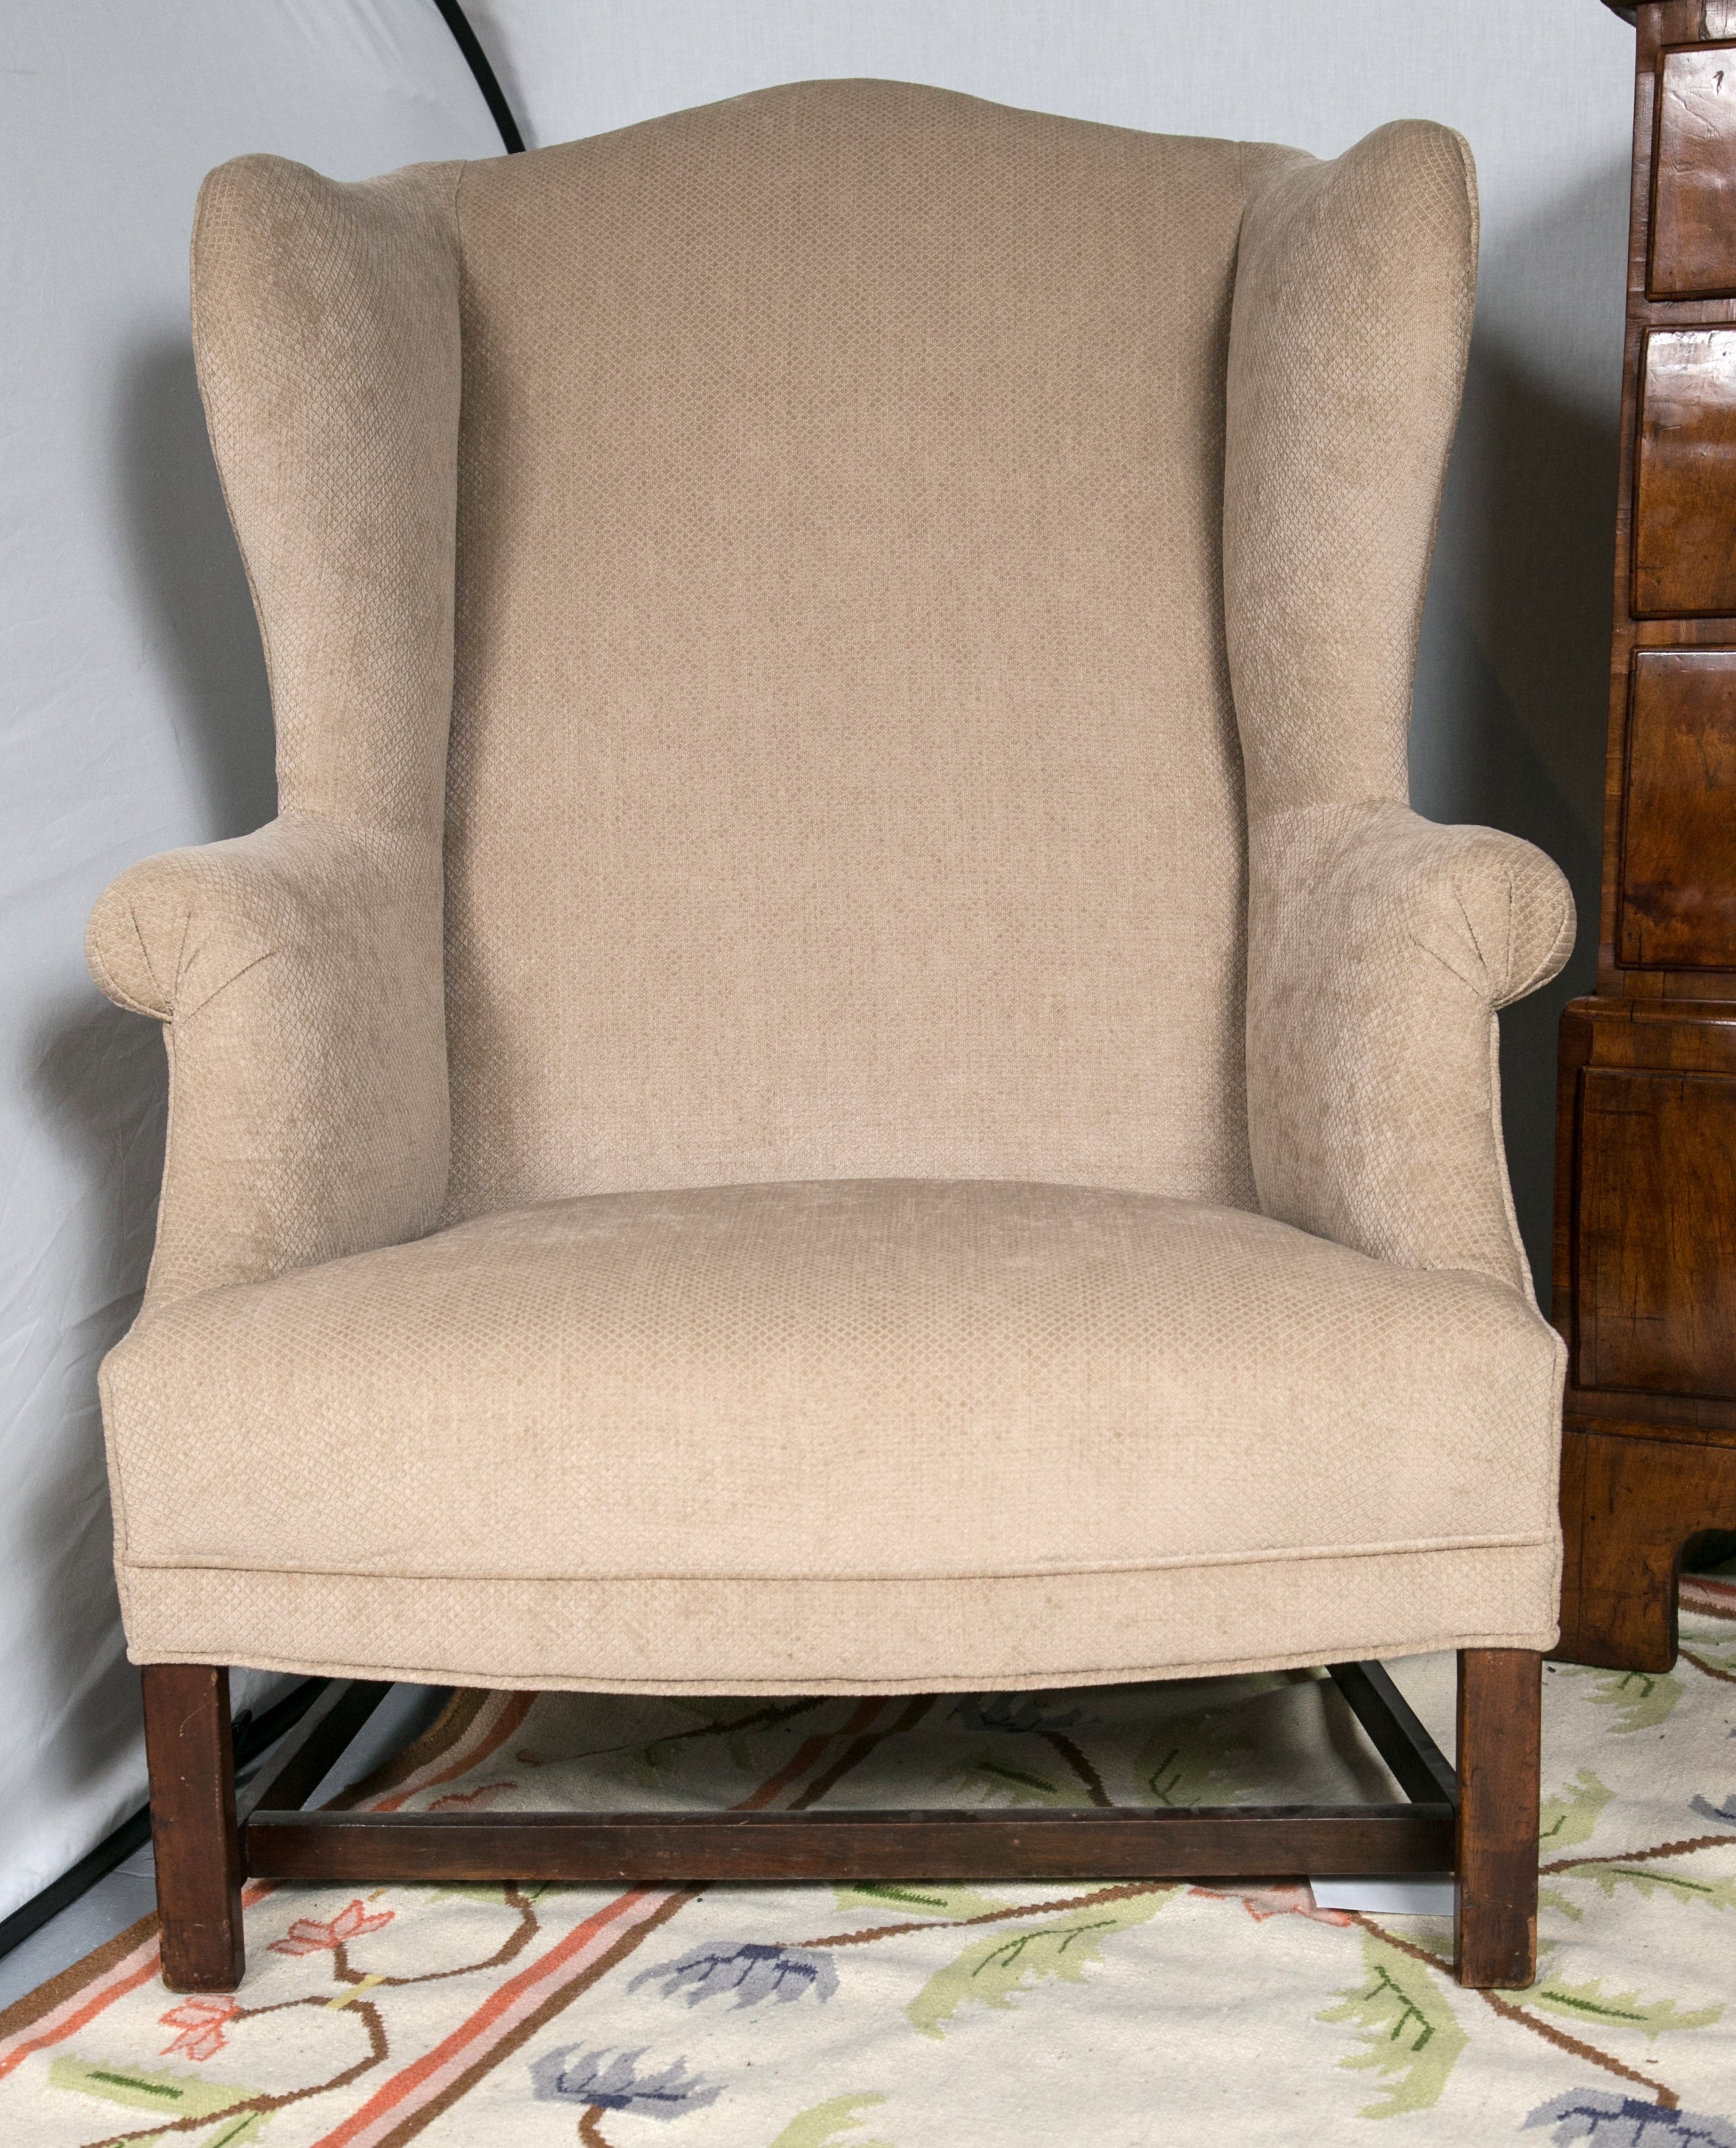 Connecticut Gentleman's Mahogany Framed Wingback Chair For Sale